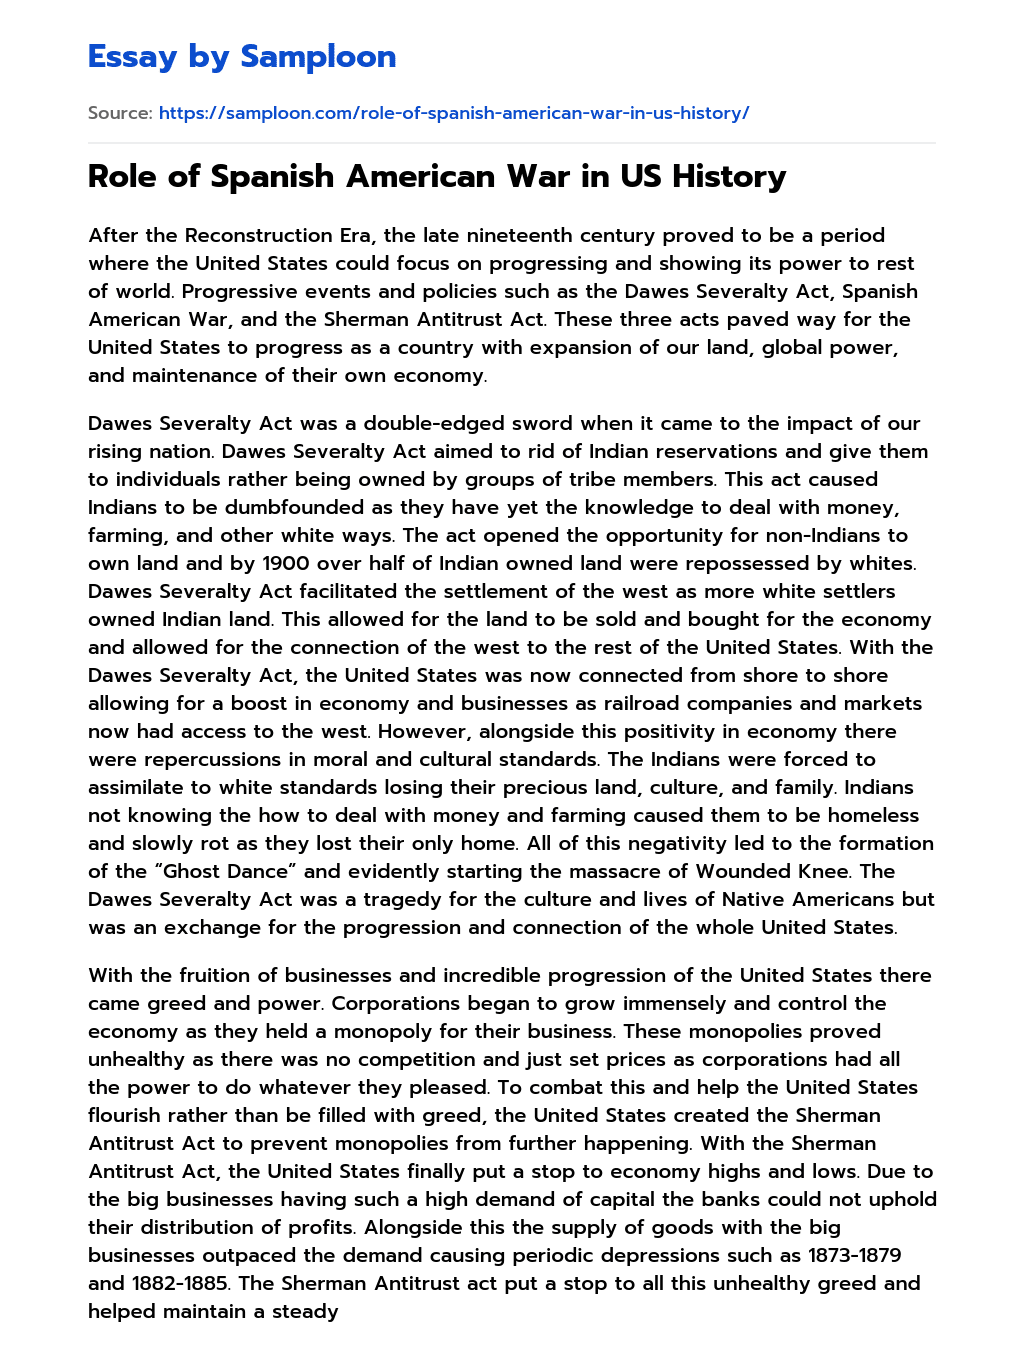 Role of Spanish American War in US History essay